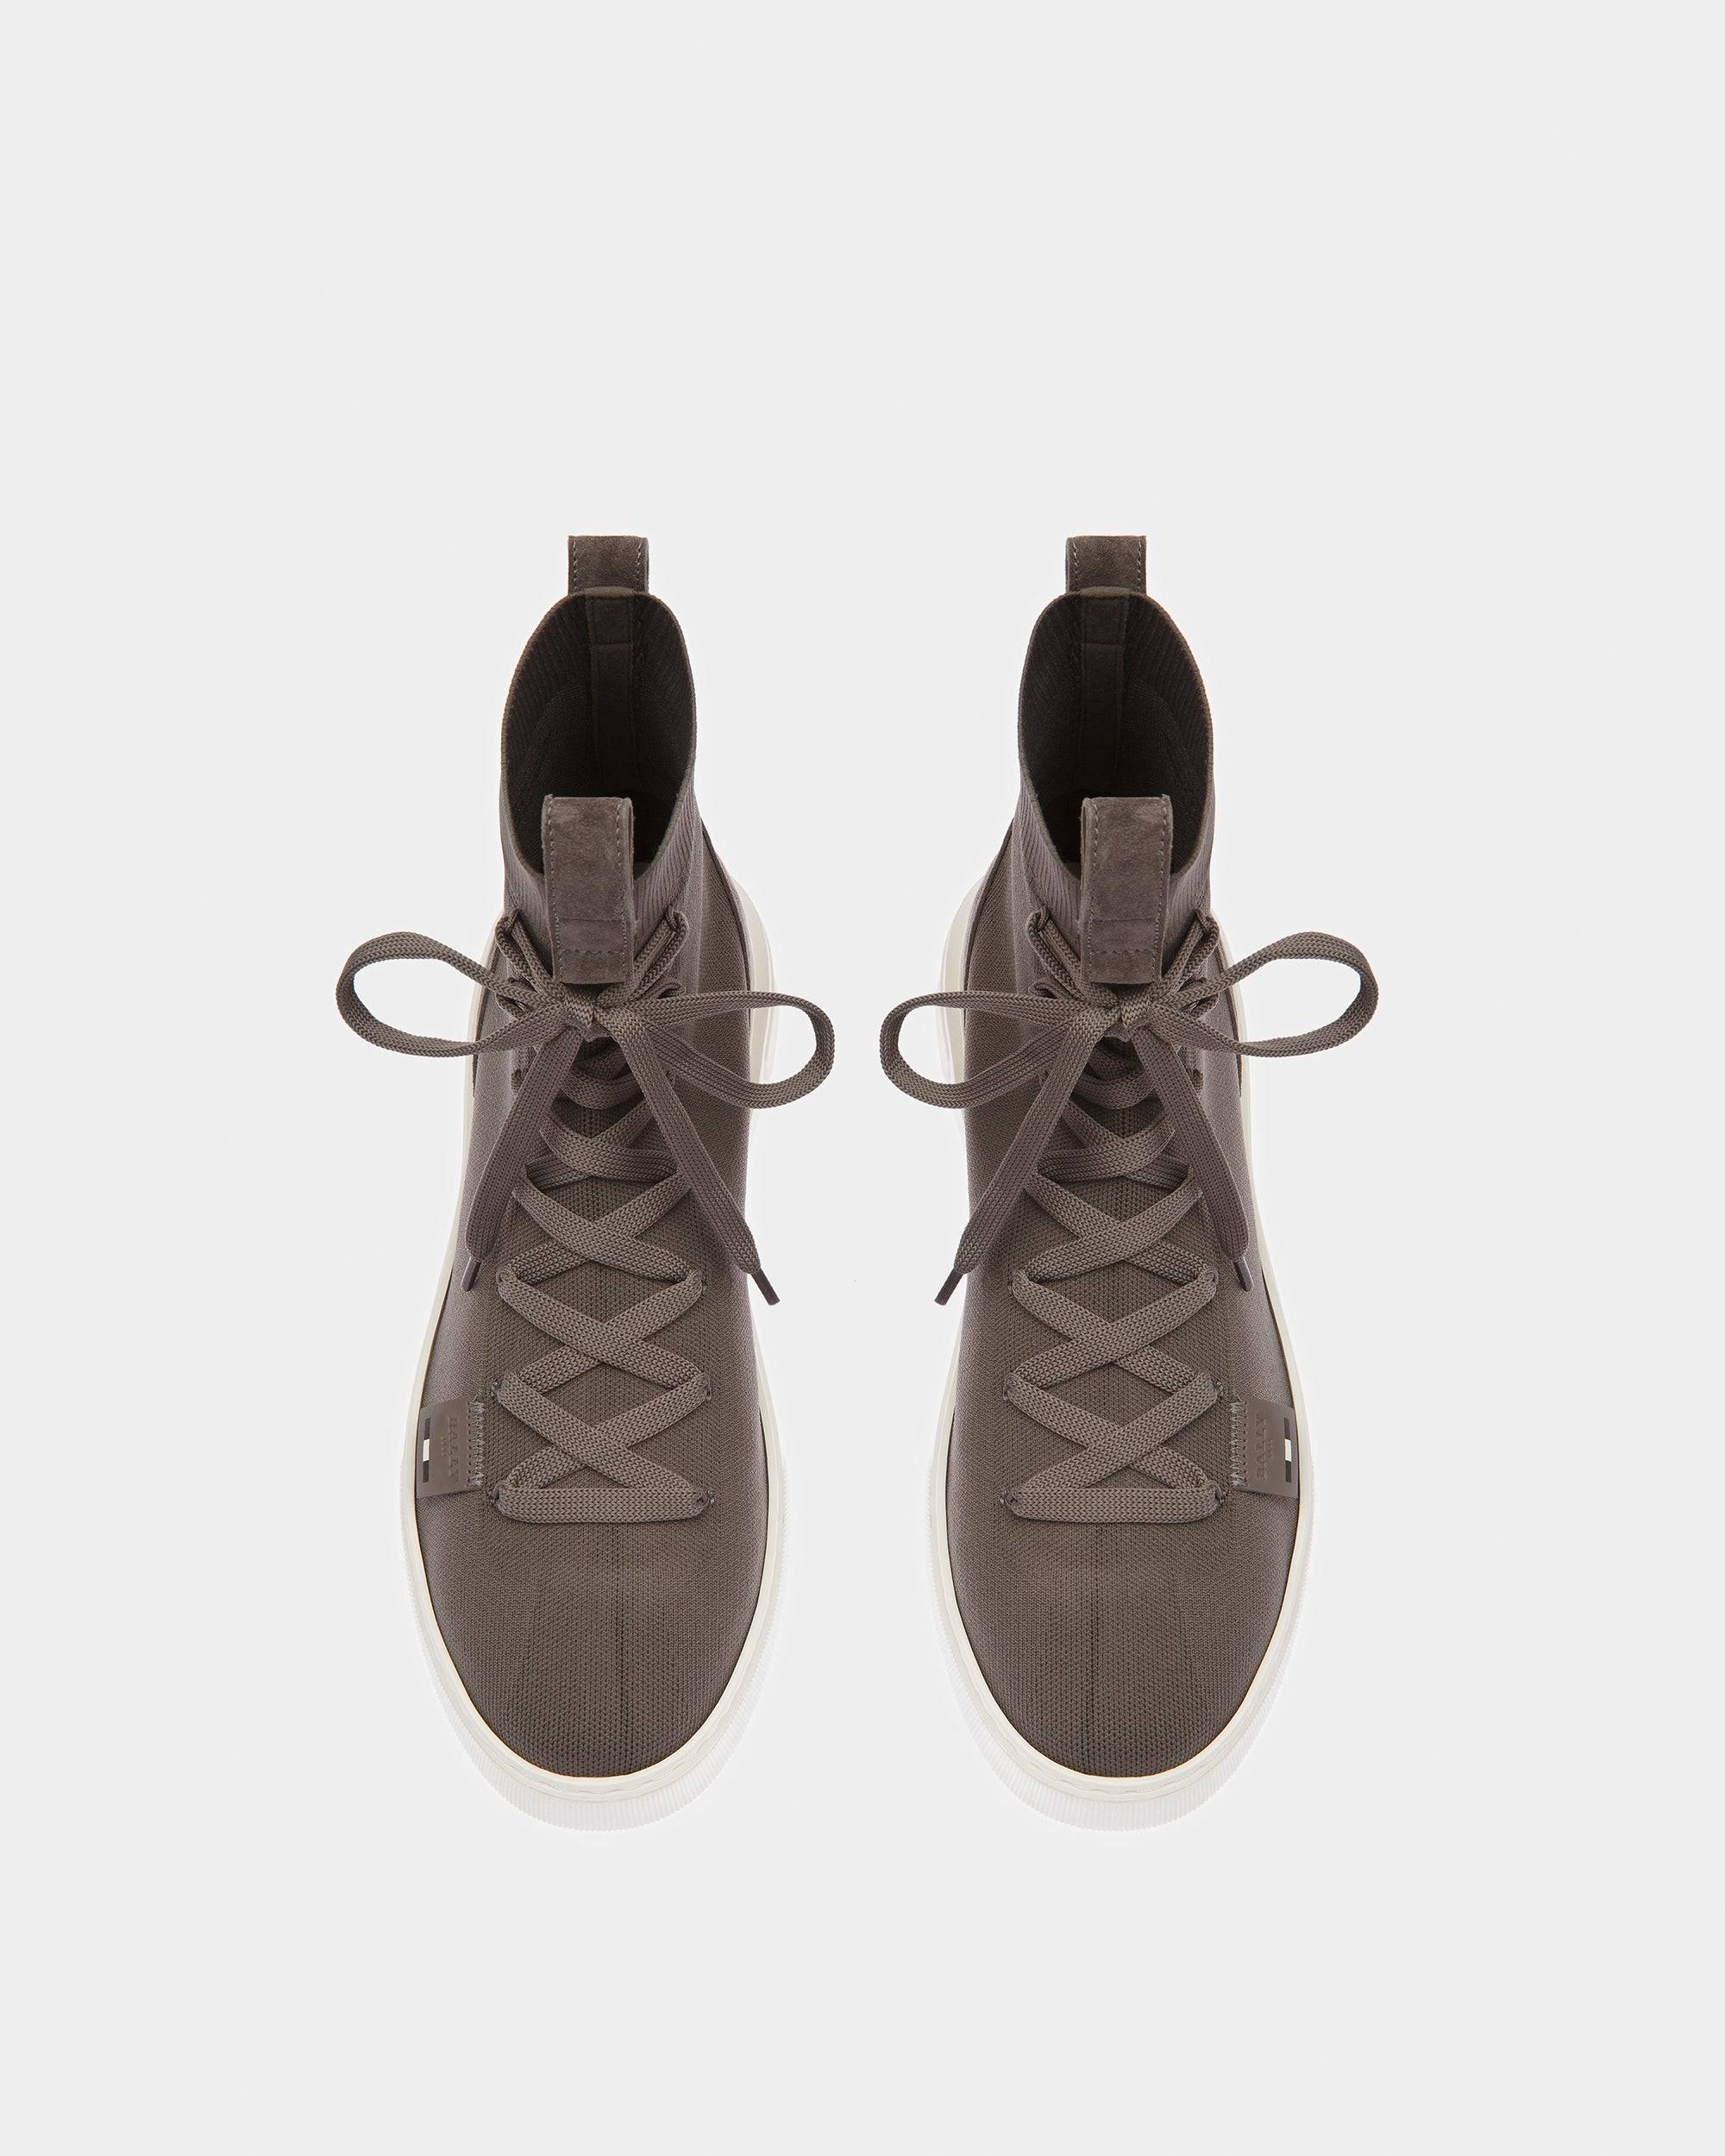 Mitys-T Sneaker In Pelle Antracite - Bally - 02